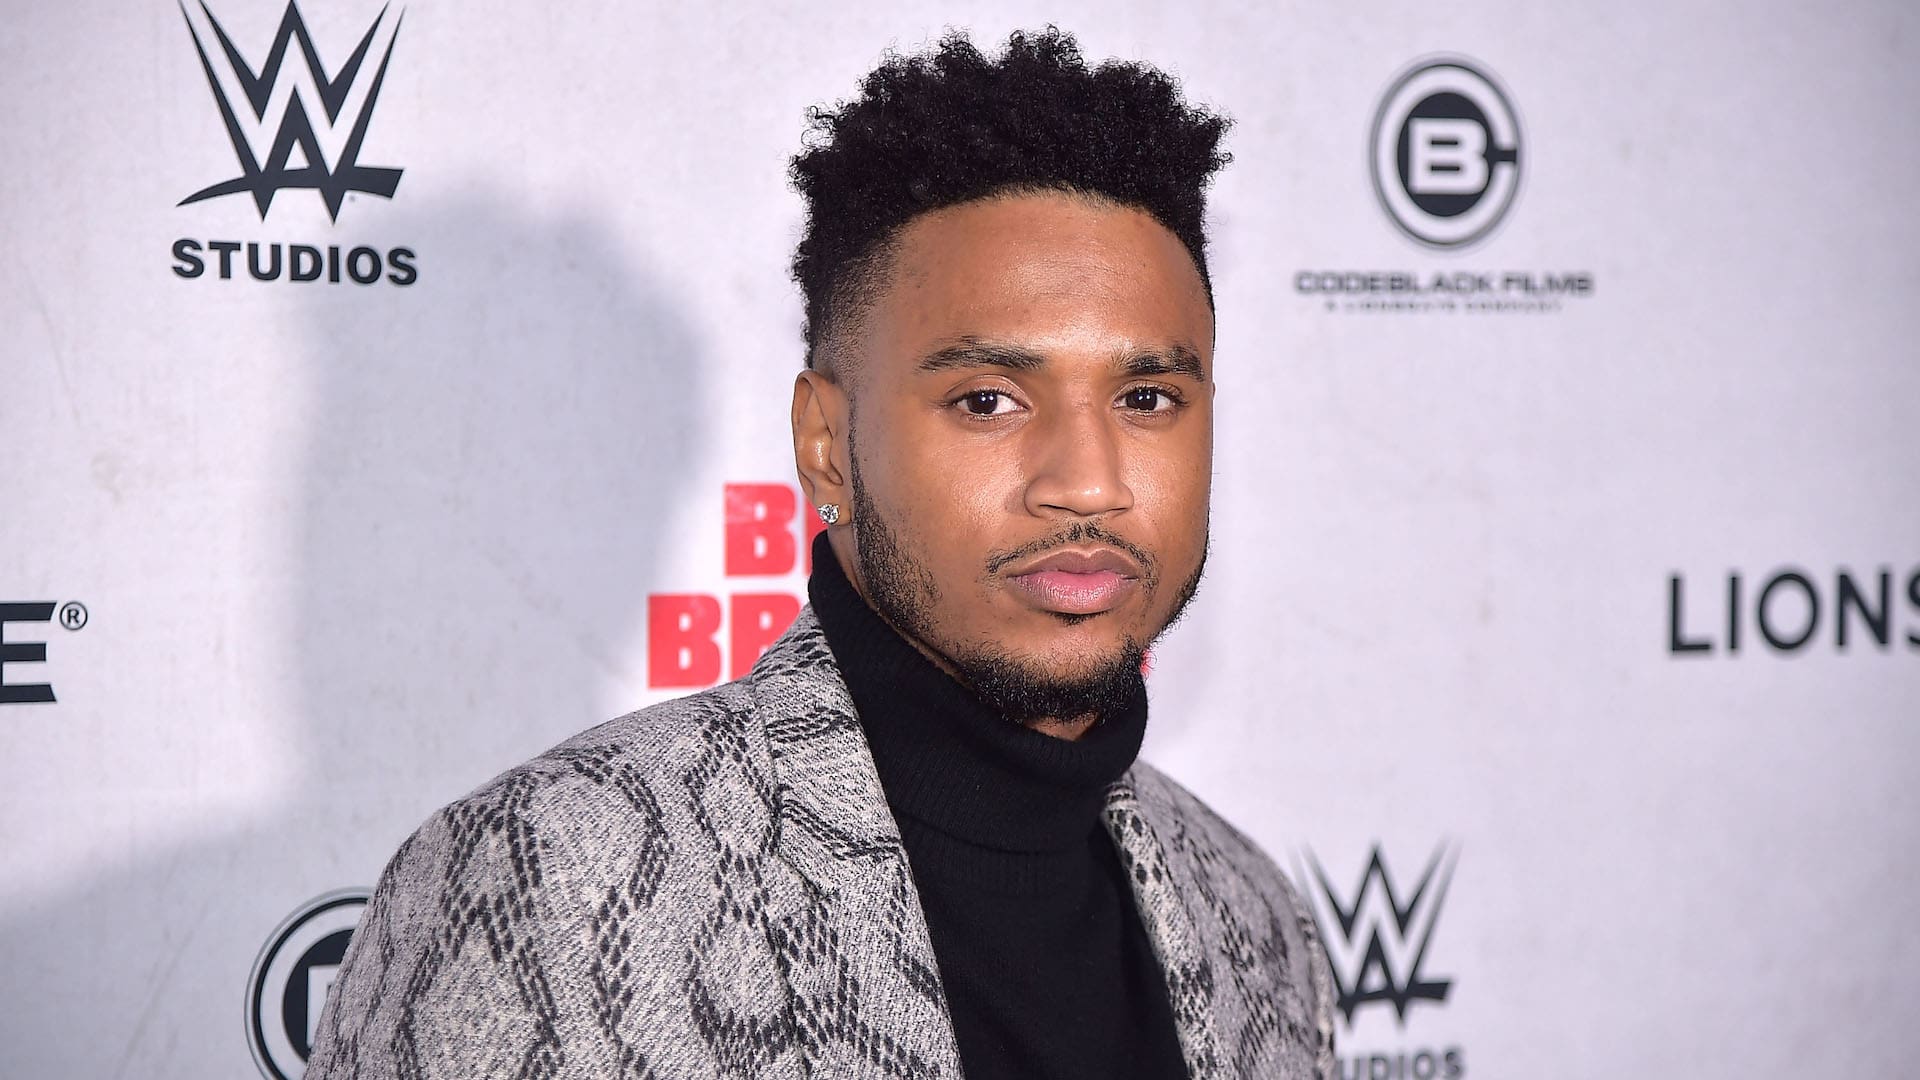 Two Women Drop Lawsuit Against Trey Songz Over Alleged Sexual Assault at 2015 House Party